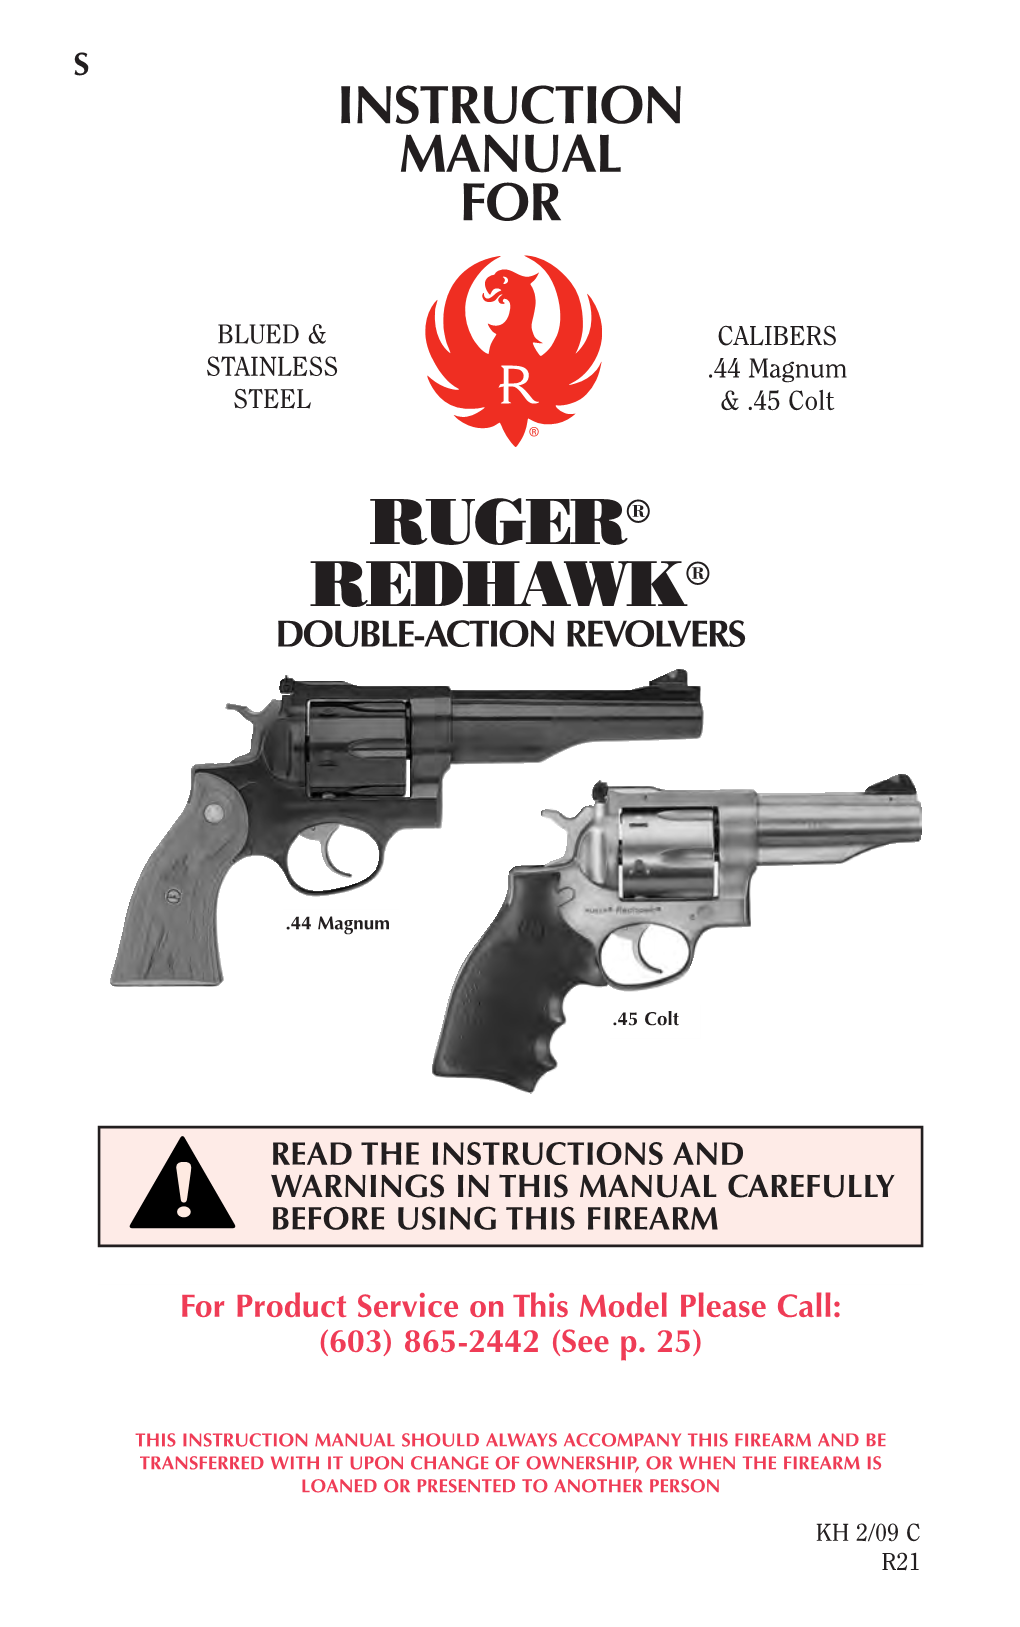 Ruger® Redhawk® Double-Action Revolvers